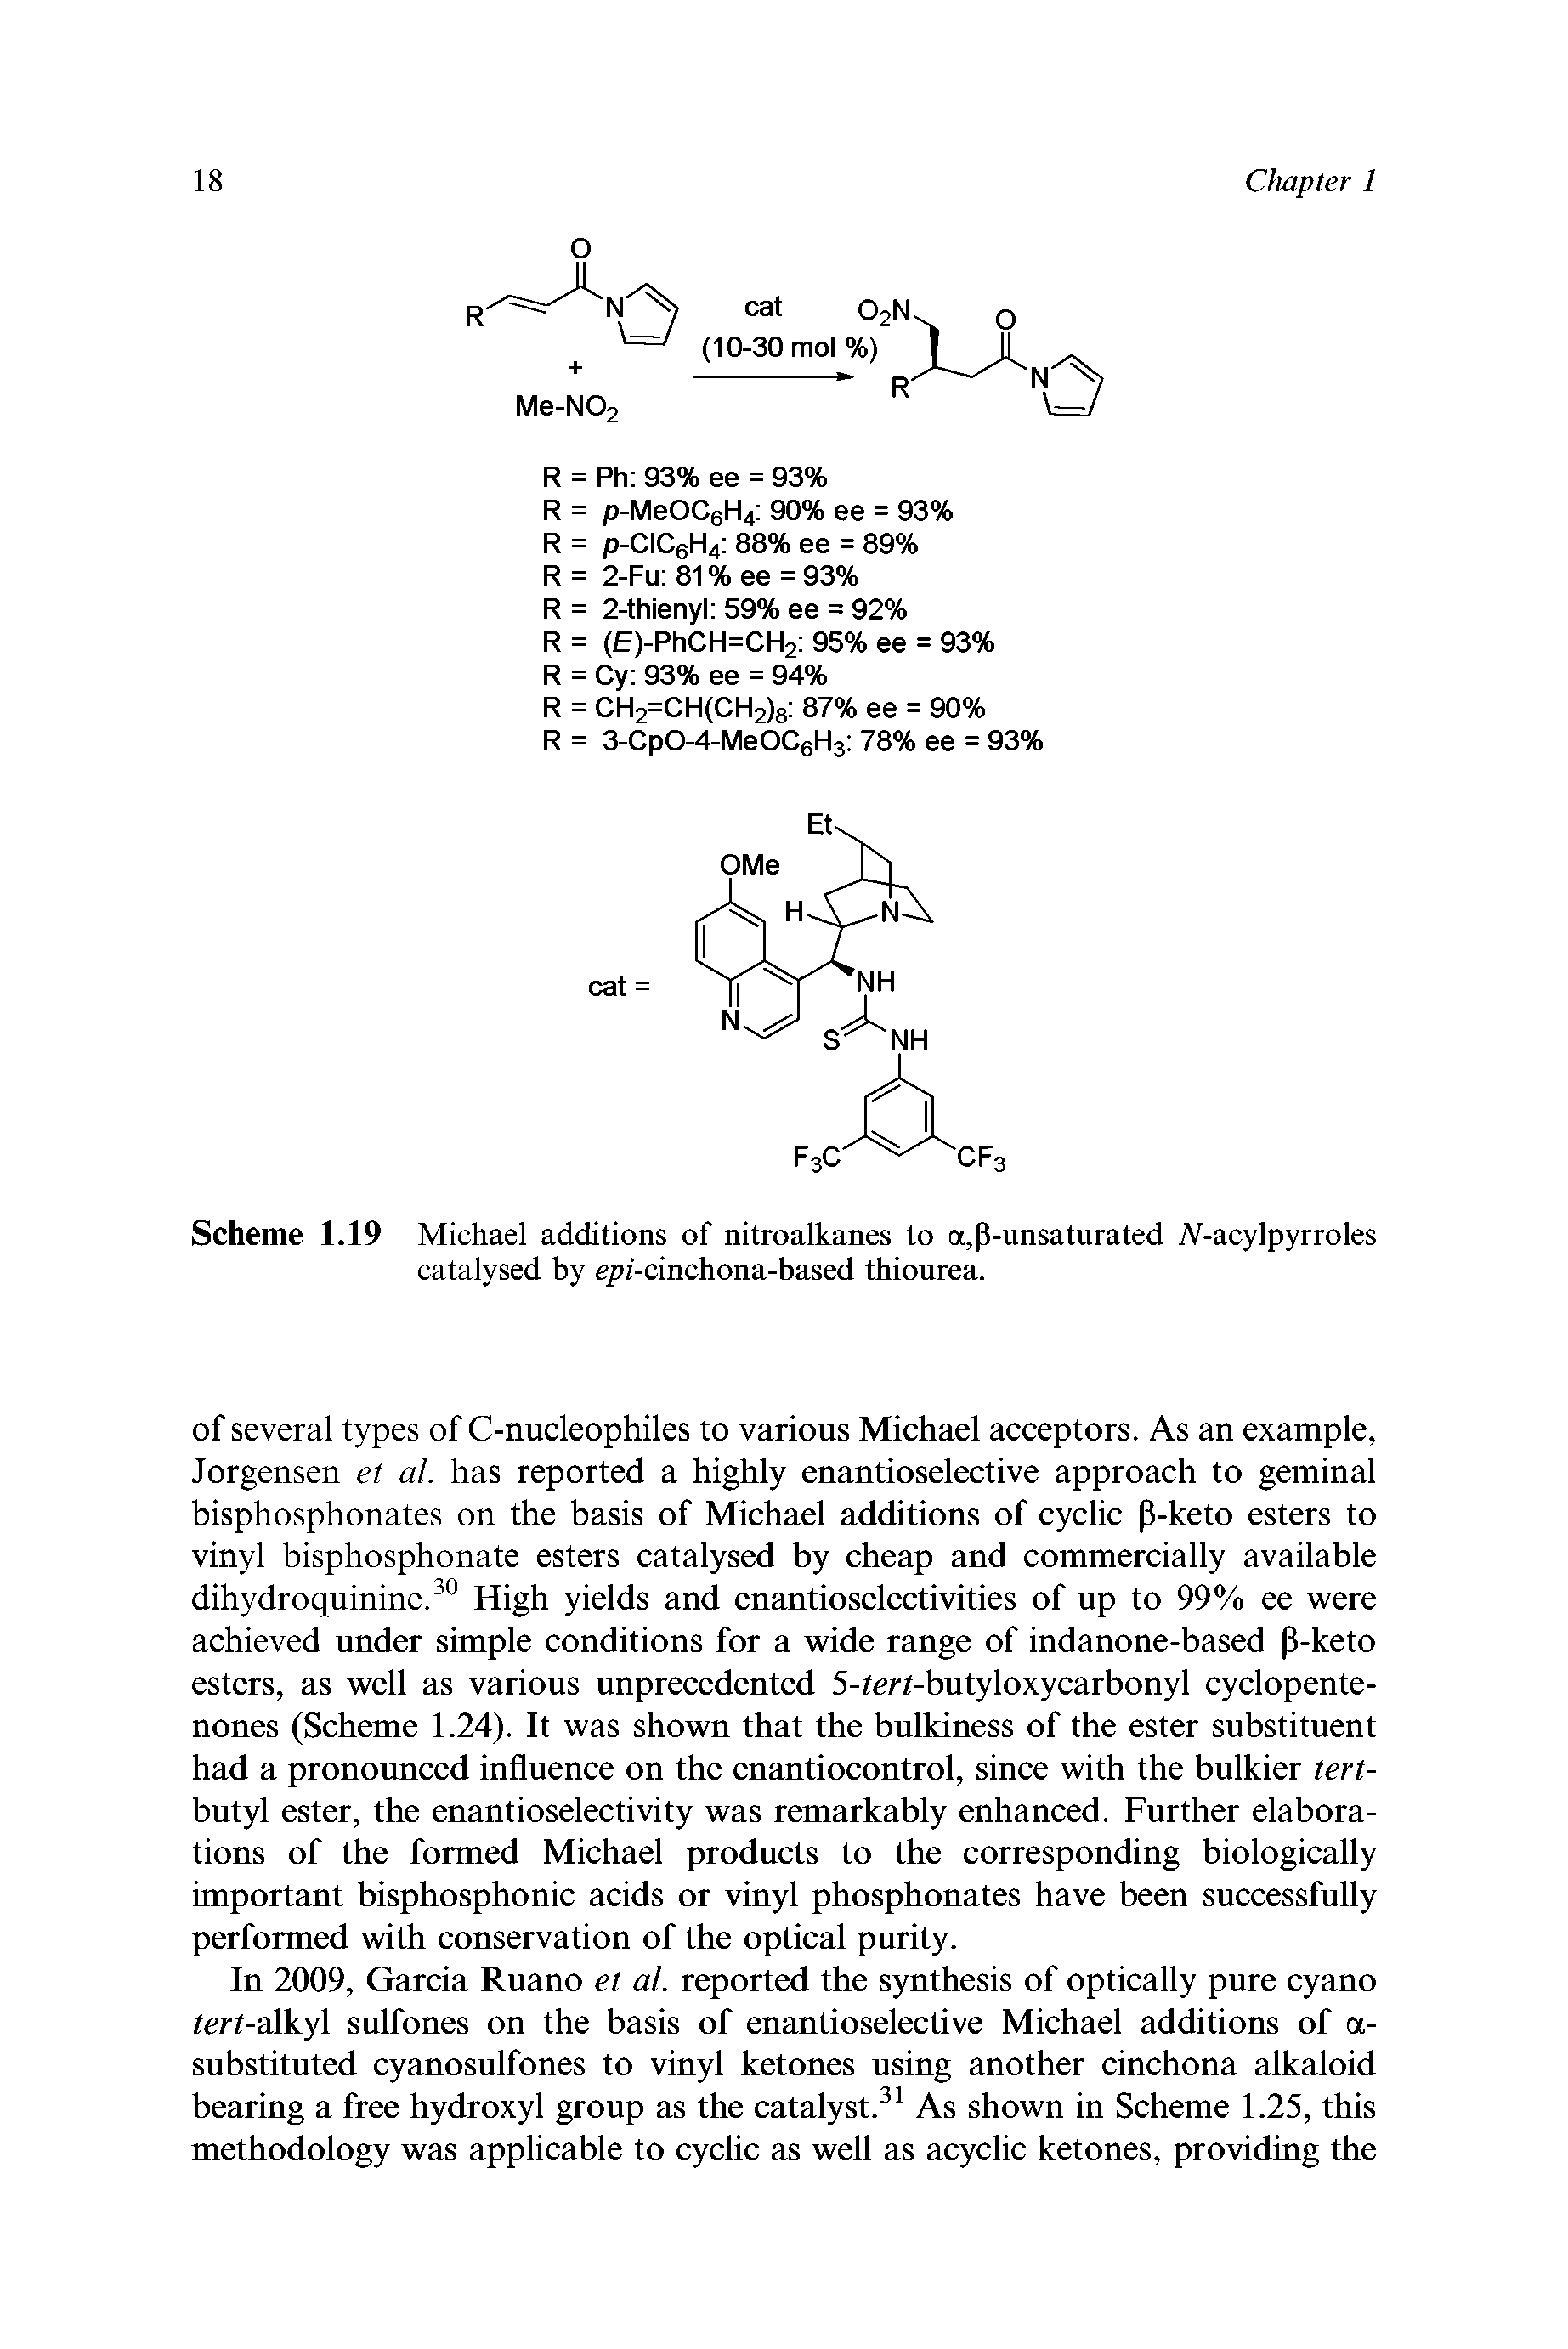 Scheme 1.19 Michael additions of nitroalkanes to a,p-unsaturated Af-acylpyrroles catalysed by epi-cinchona-based thiourea.